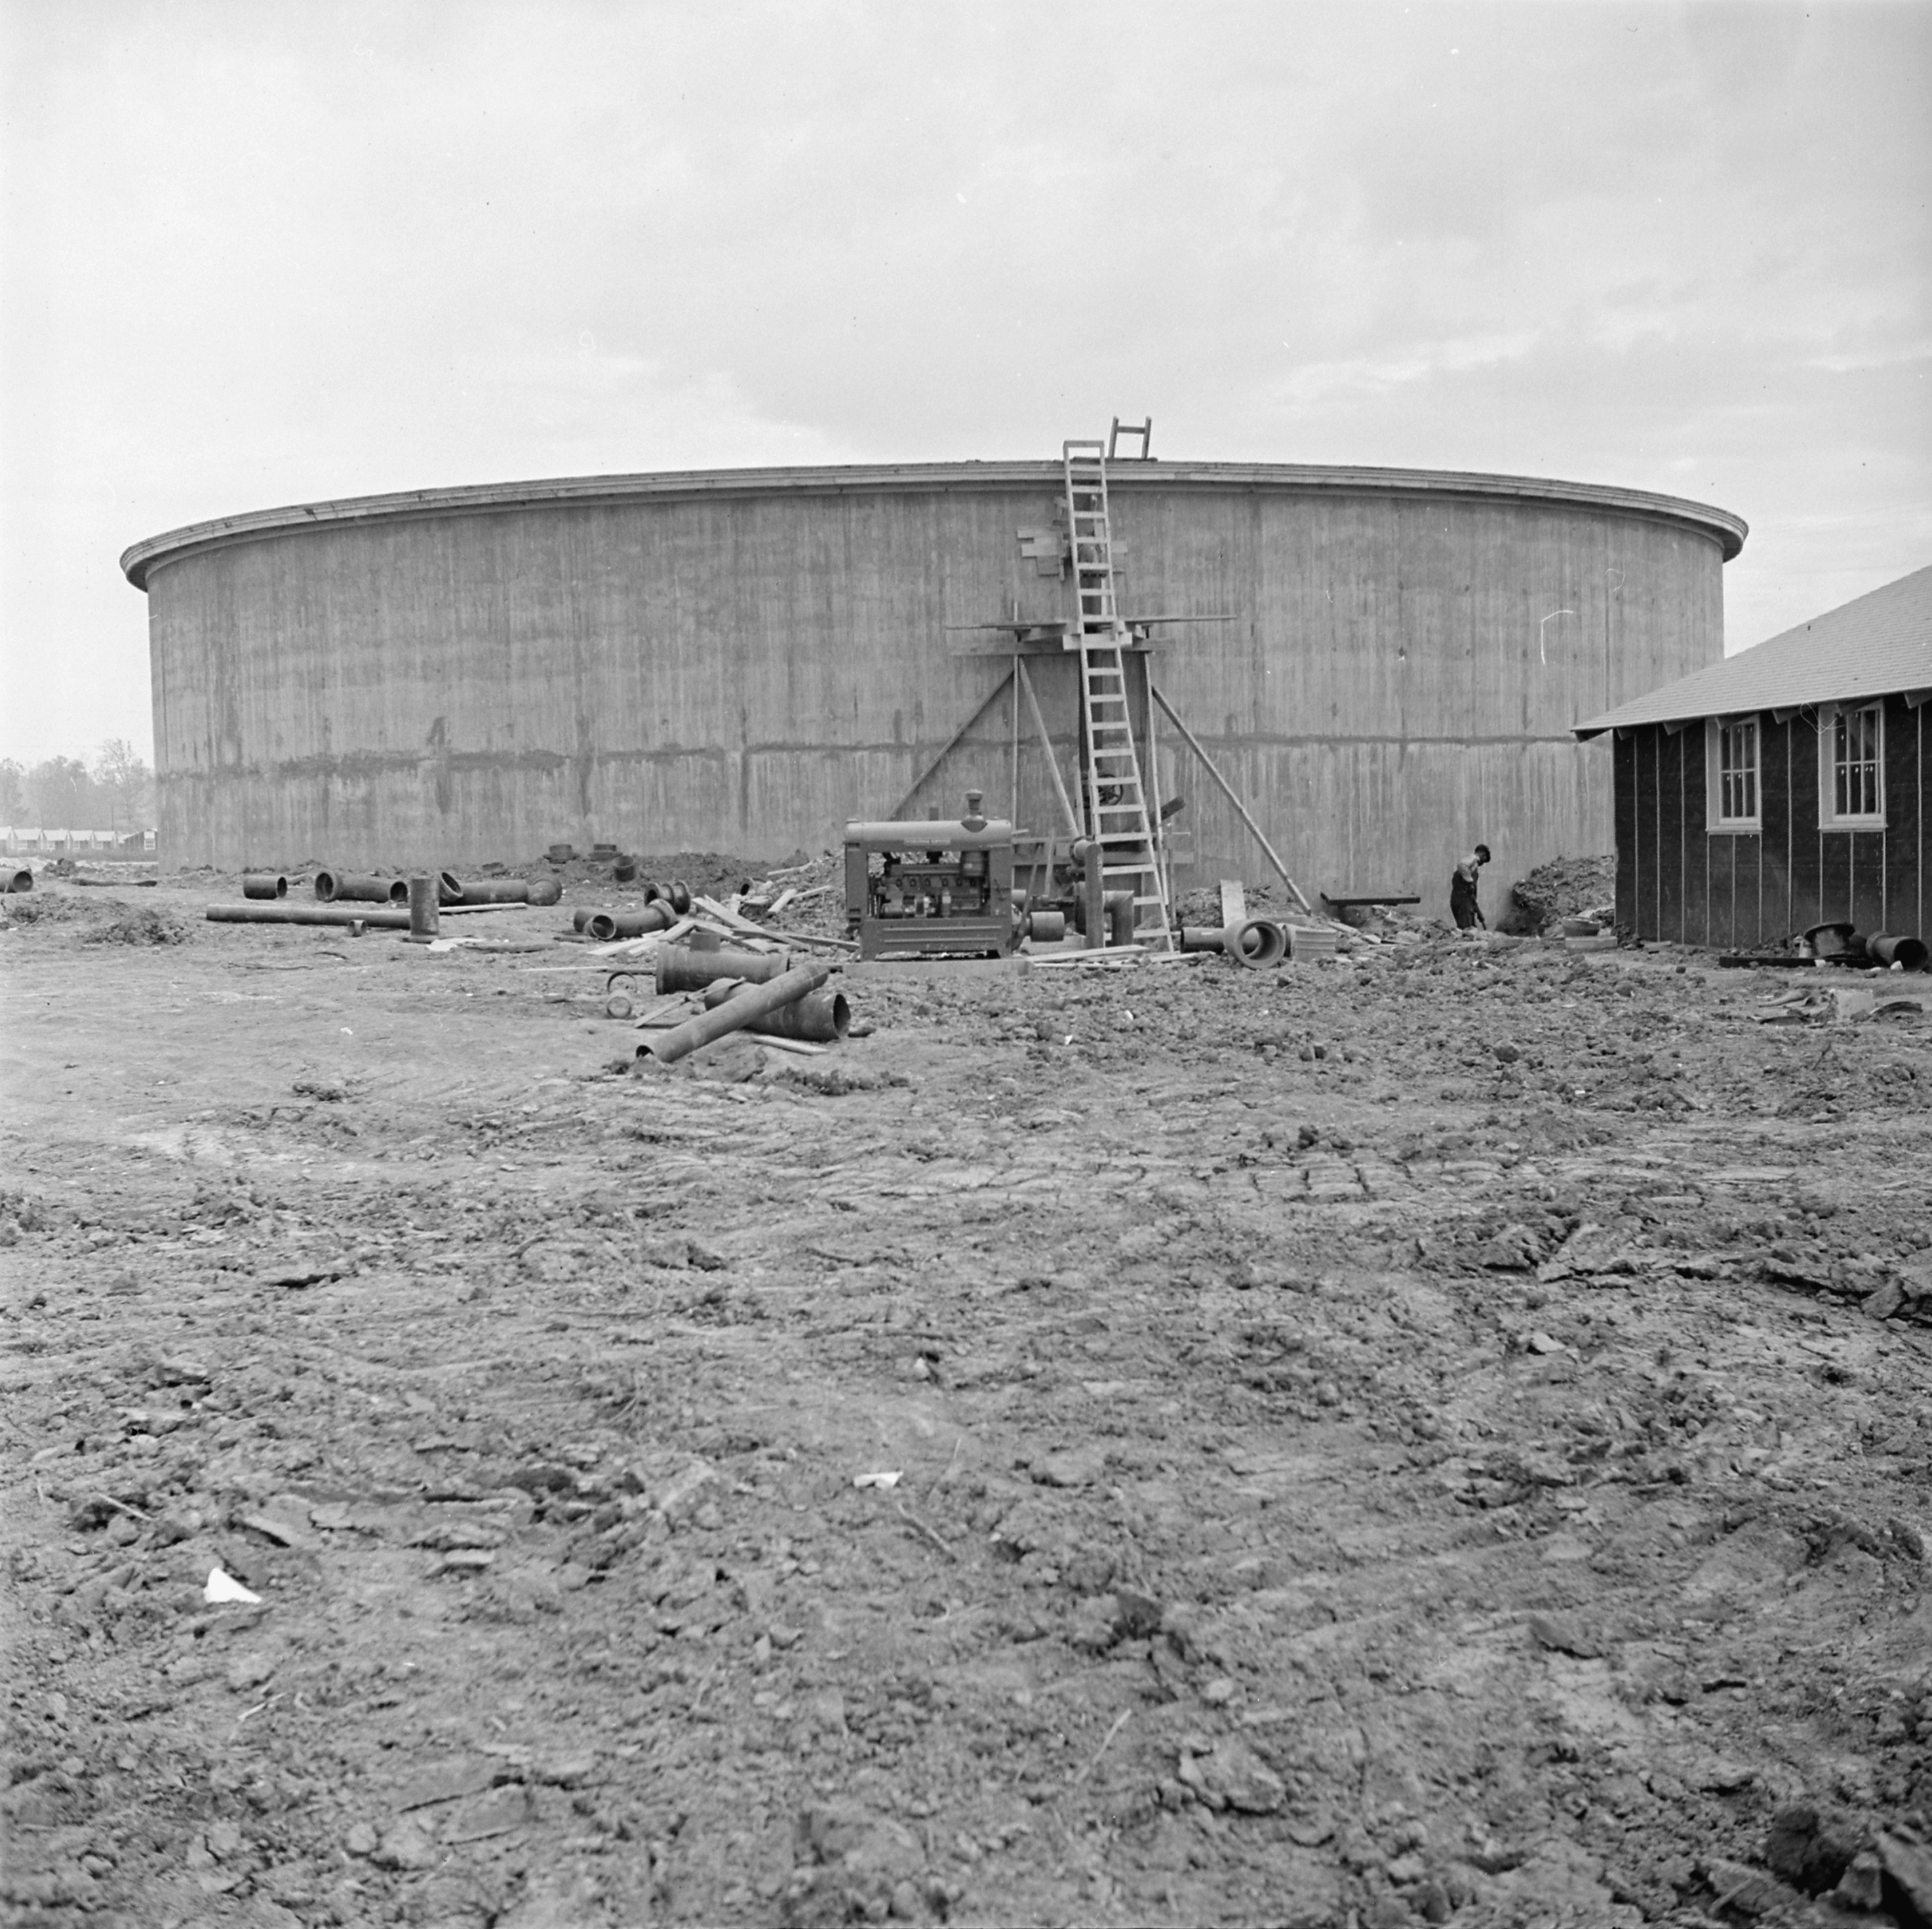 Construction of the water storage tank at Jerome War Relocation Center, Arkansas, United States, 16 Nov 1942